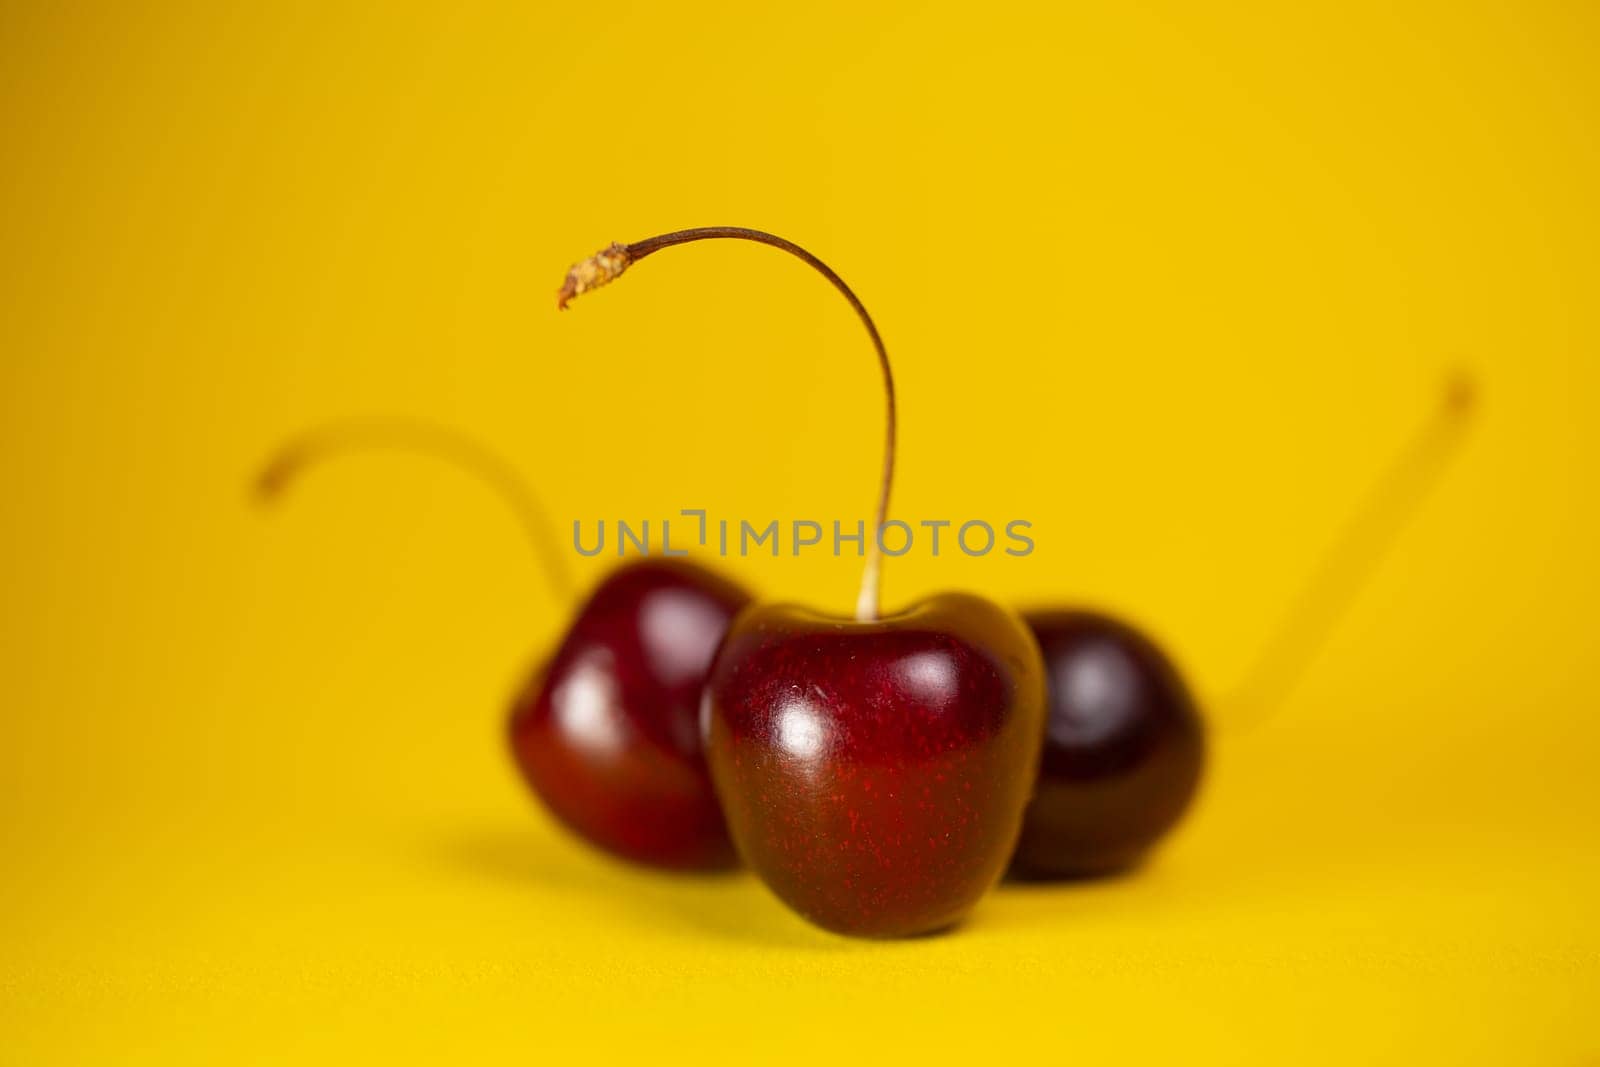 three cherries on a yellow background close-up.